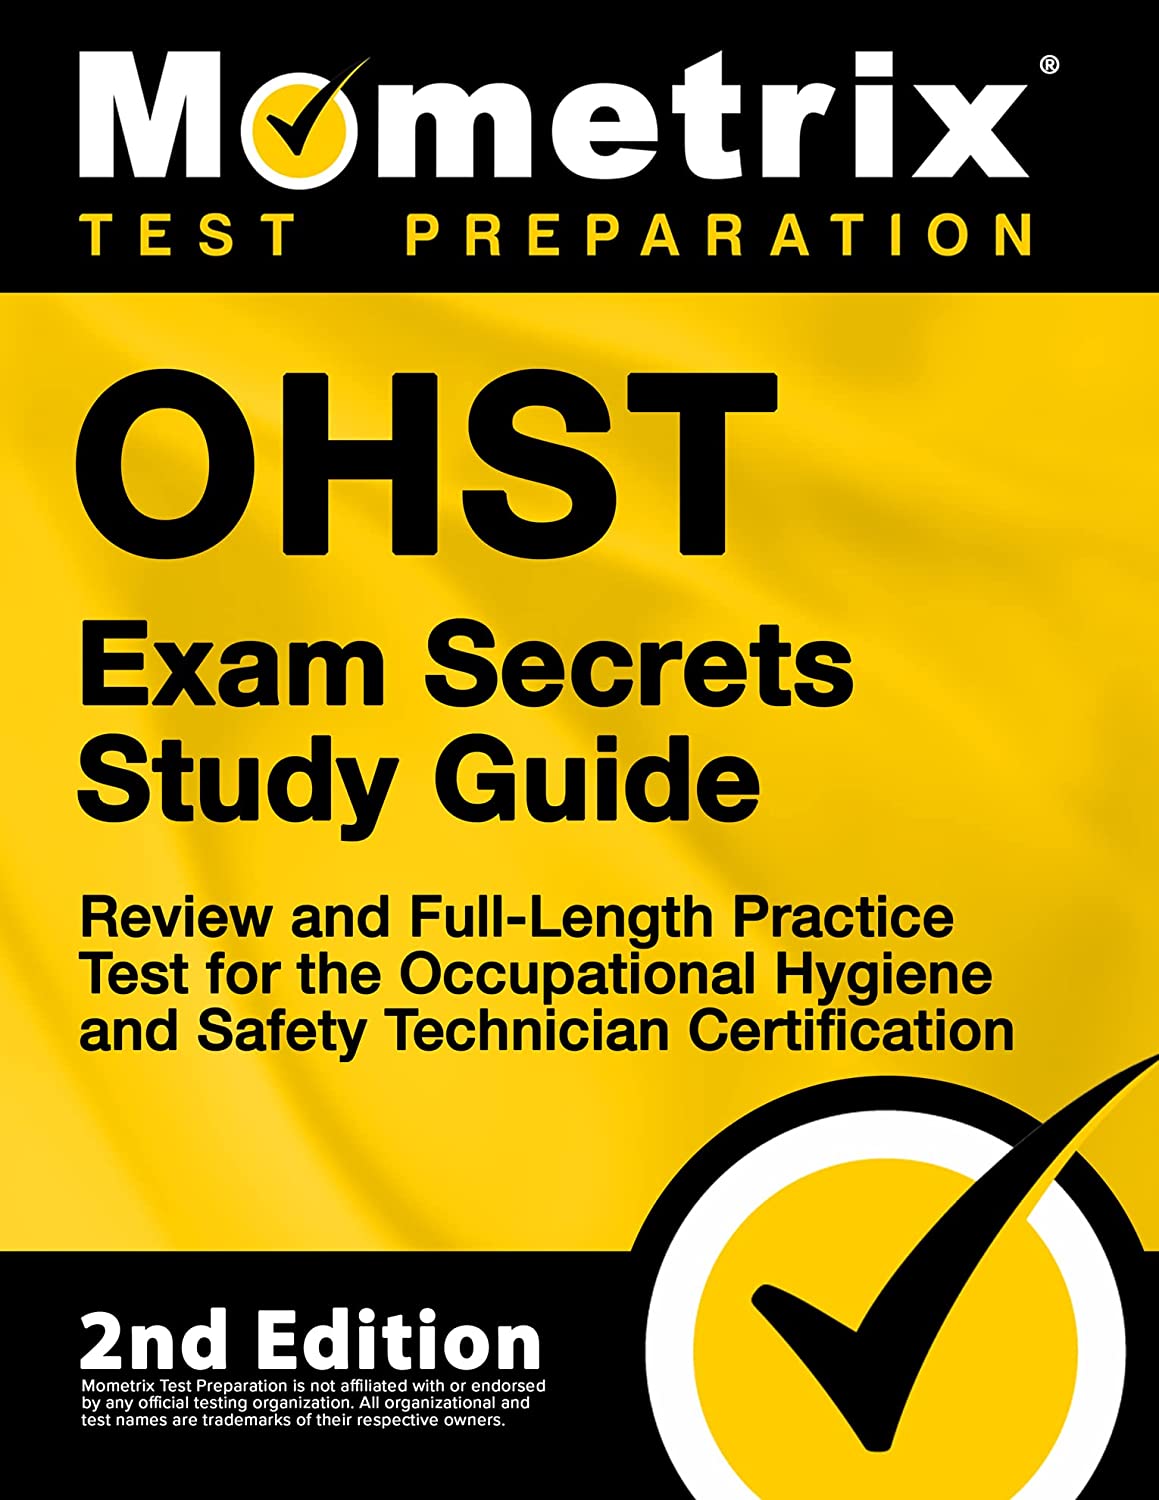 OHST Exam Secrets Study Guide: Review and Full-Length Practice Test for the Occupational Hygiene and Safety Technician Certification: [2nd Edition]